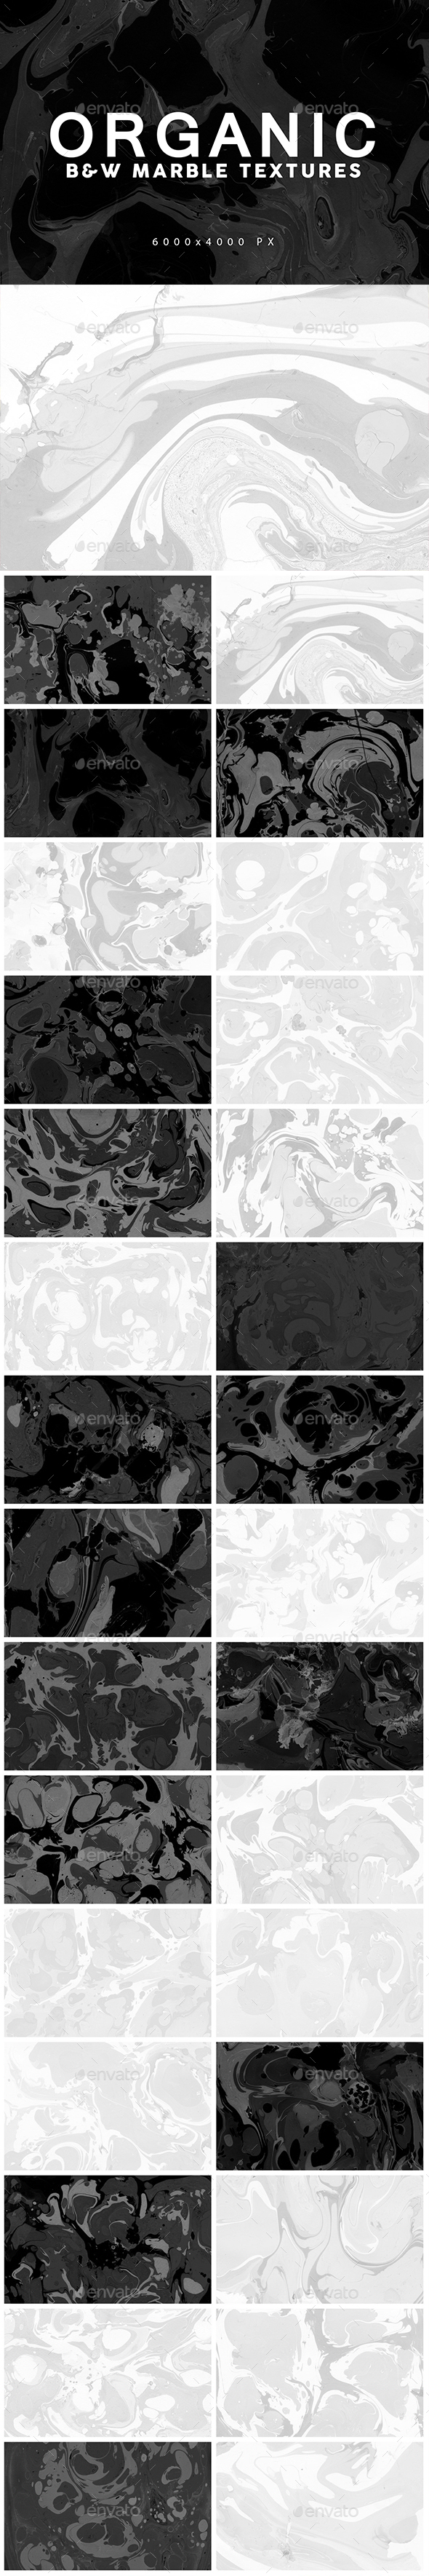 [DOWNLOAD]Black&White Organic Marble Backgrounds